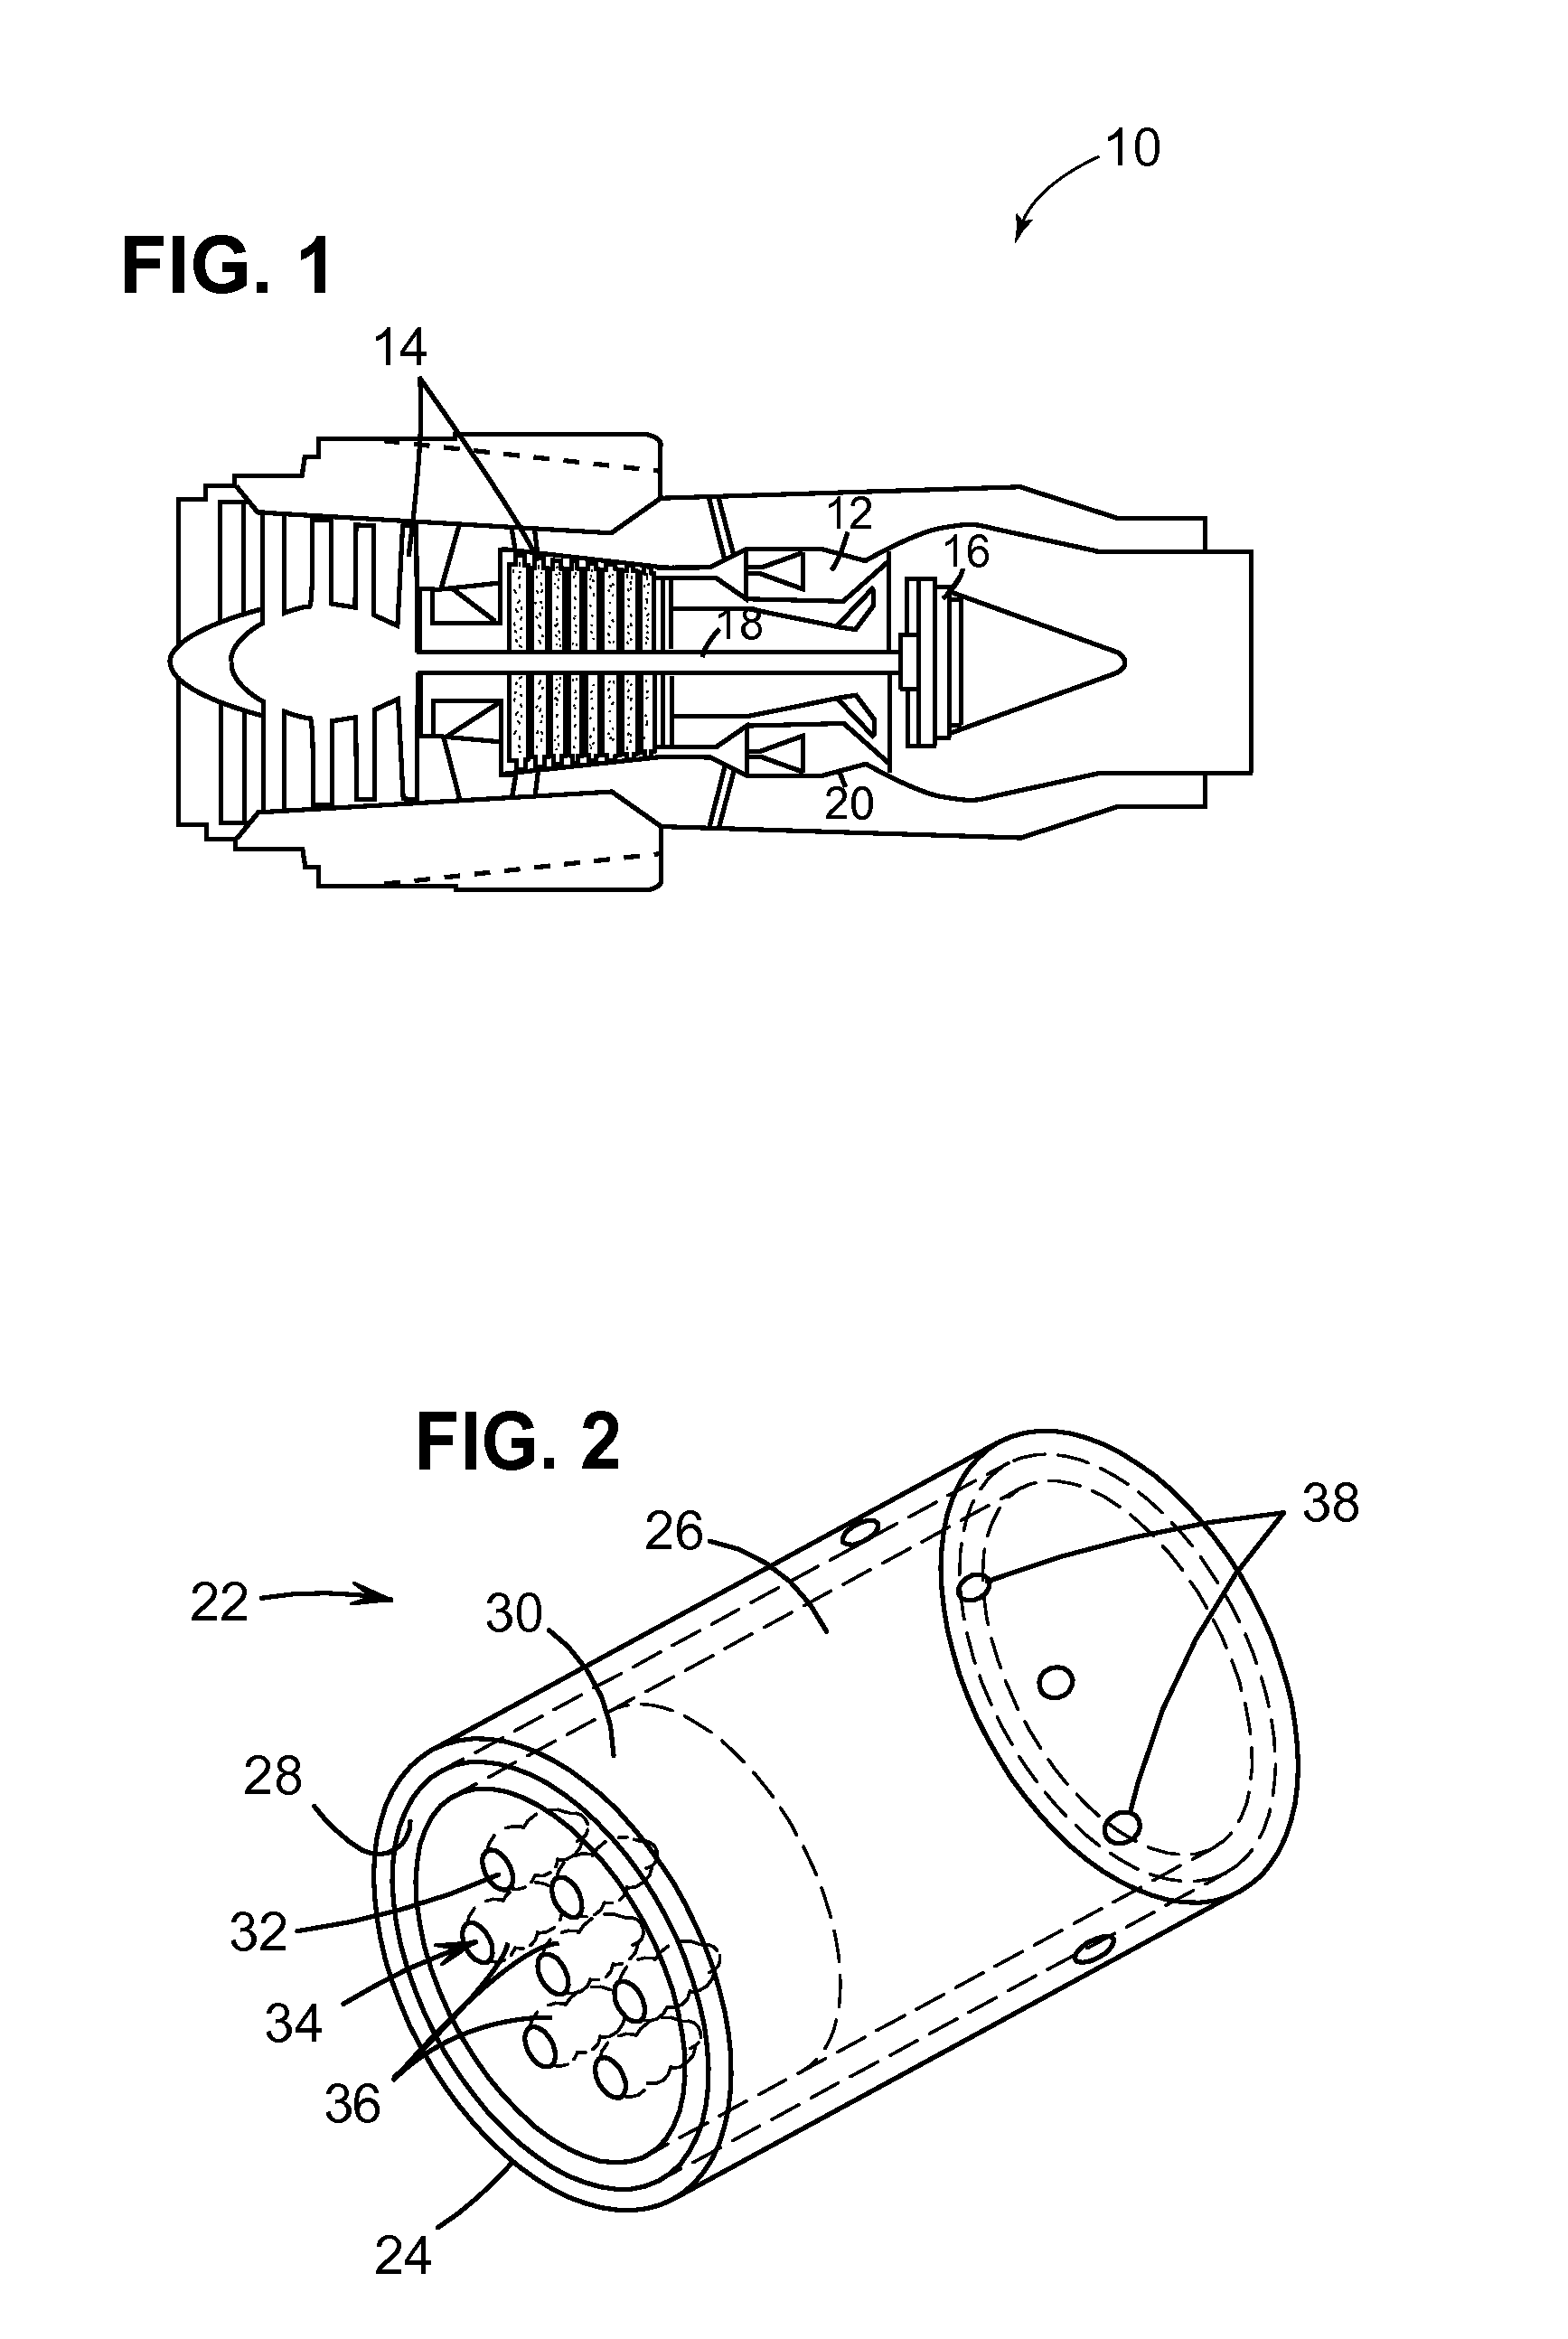 Method and apparatus for enhanced mixing in premixing devices